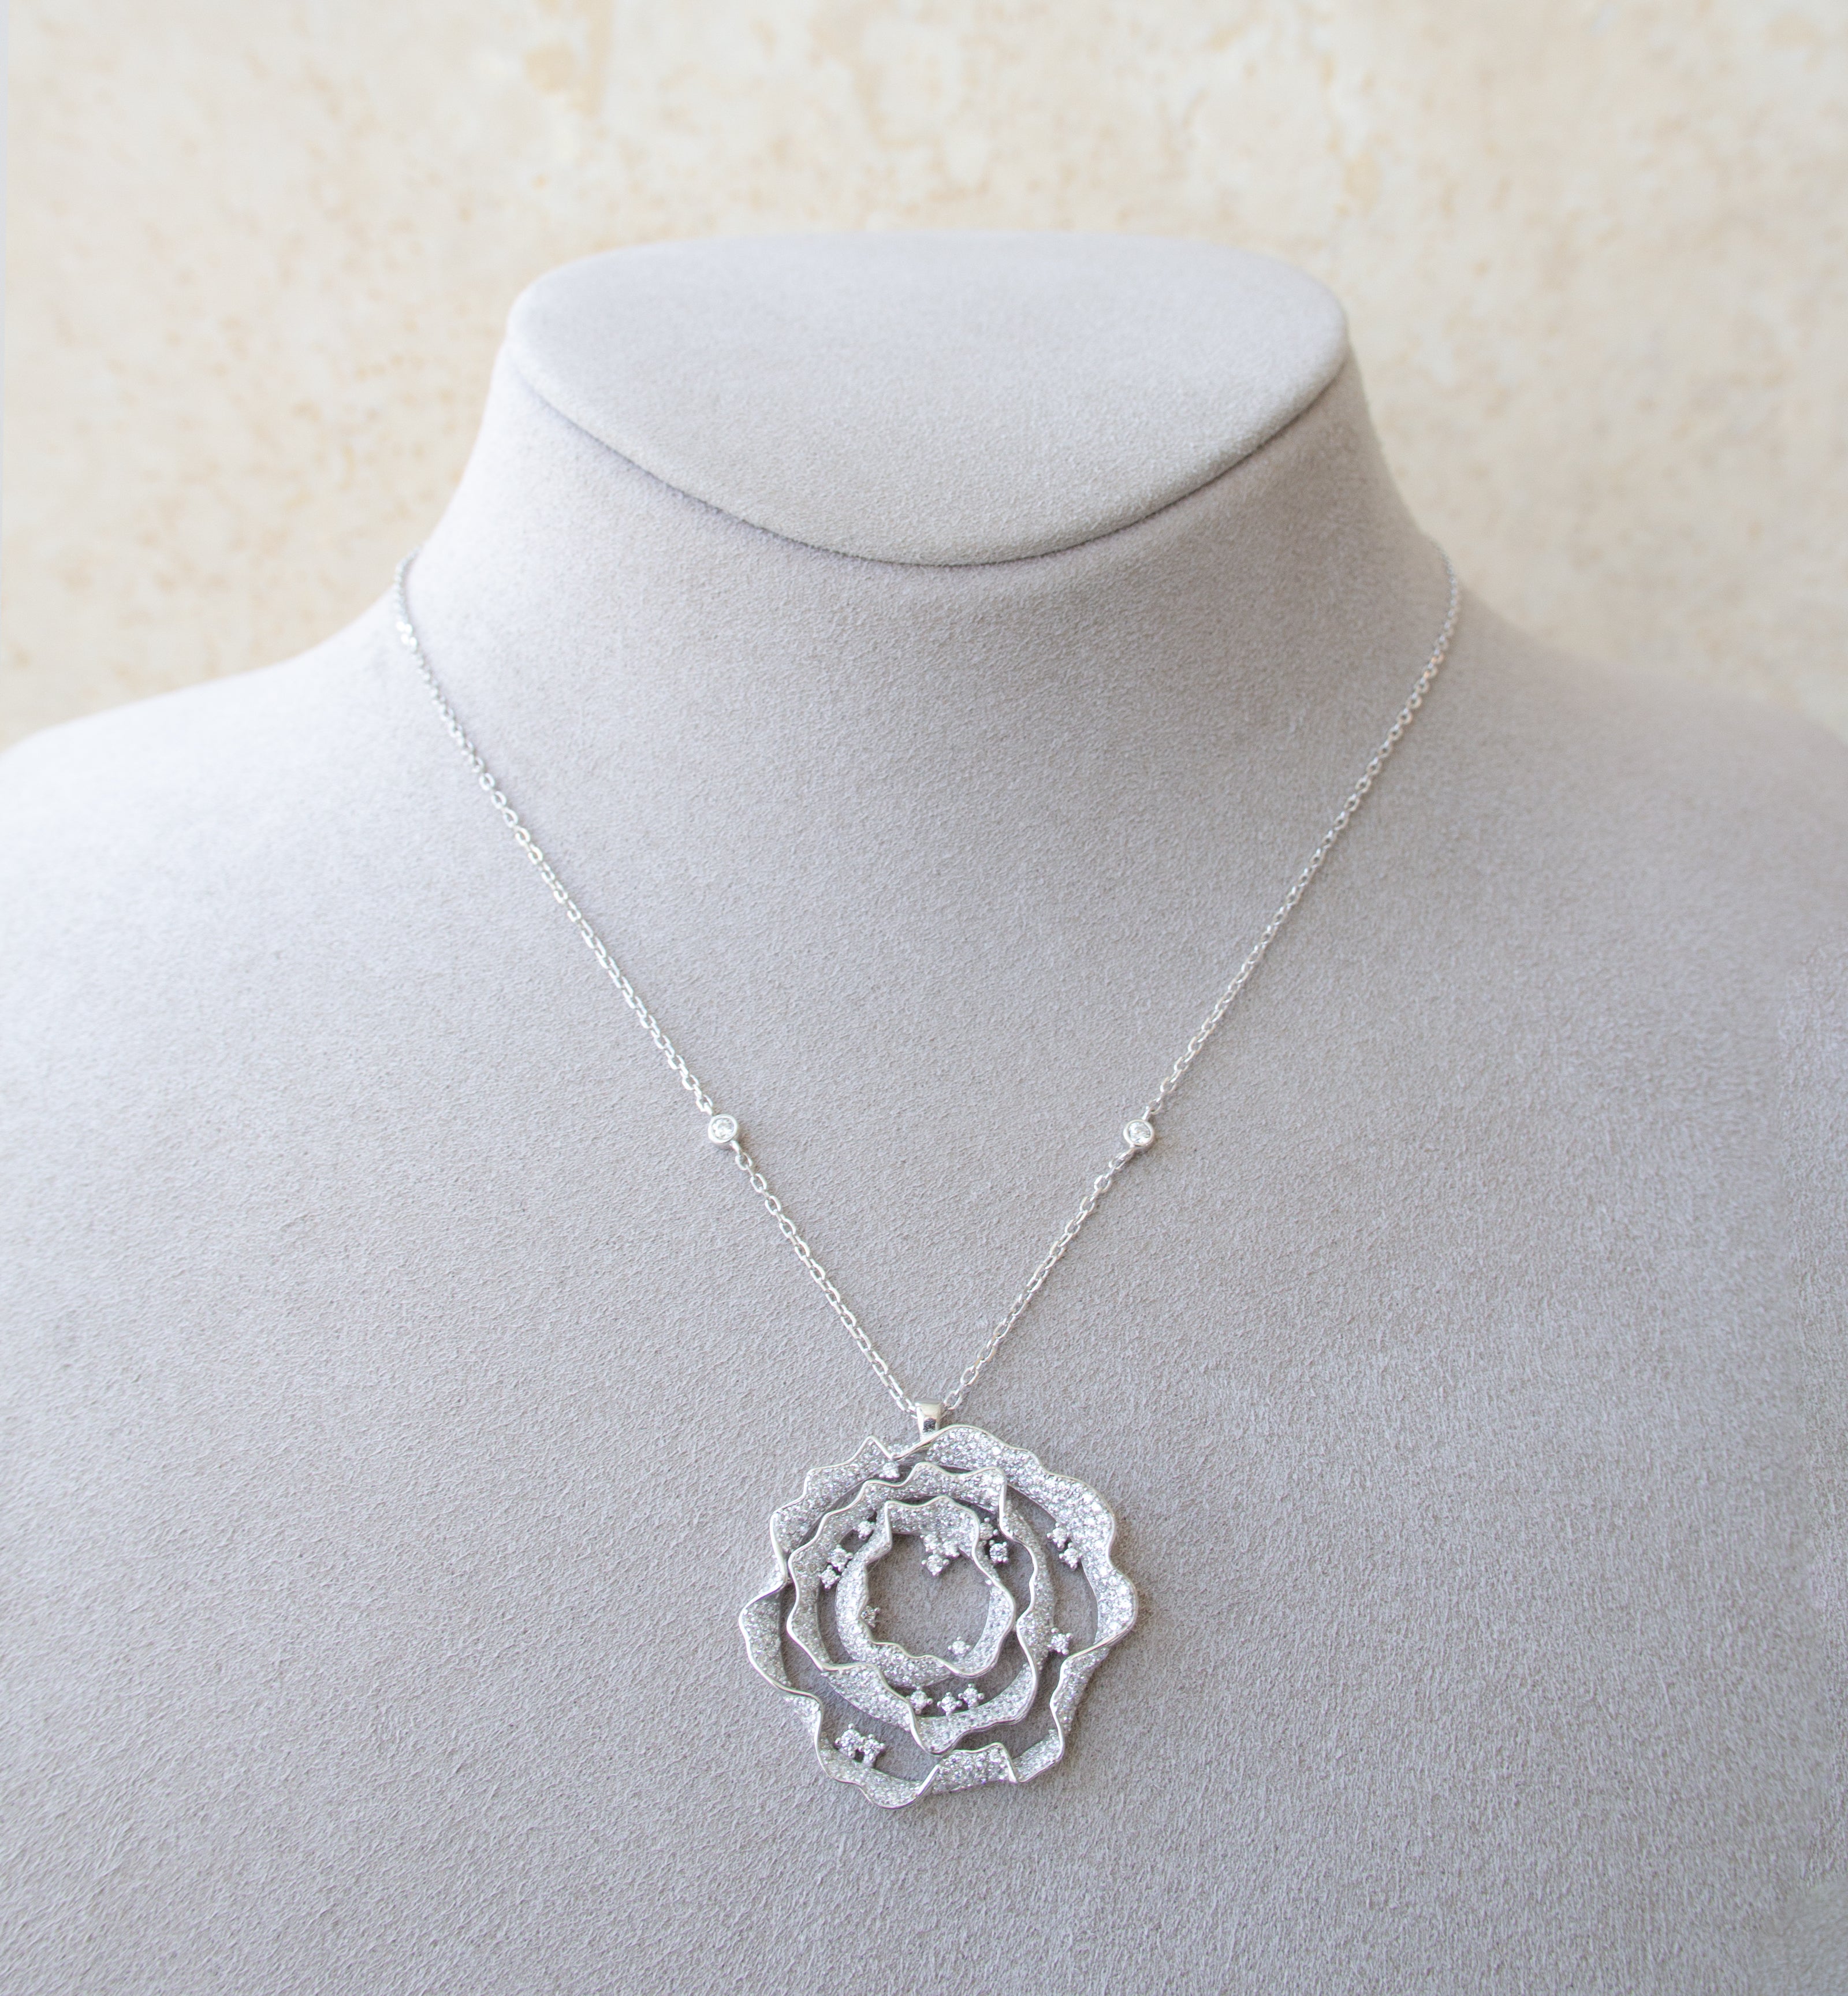 Silver 925 Rose Necklace